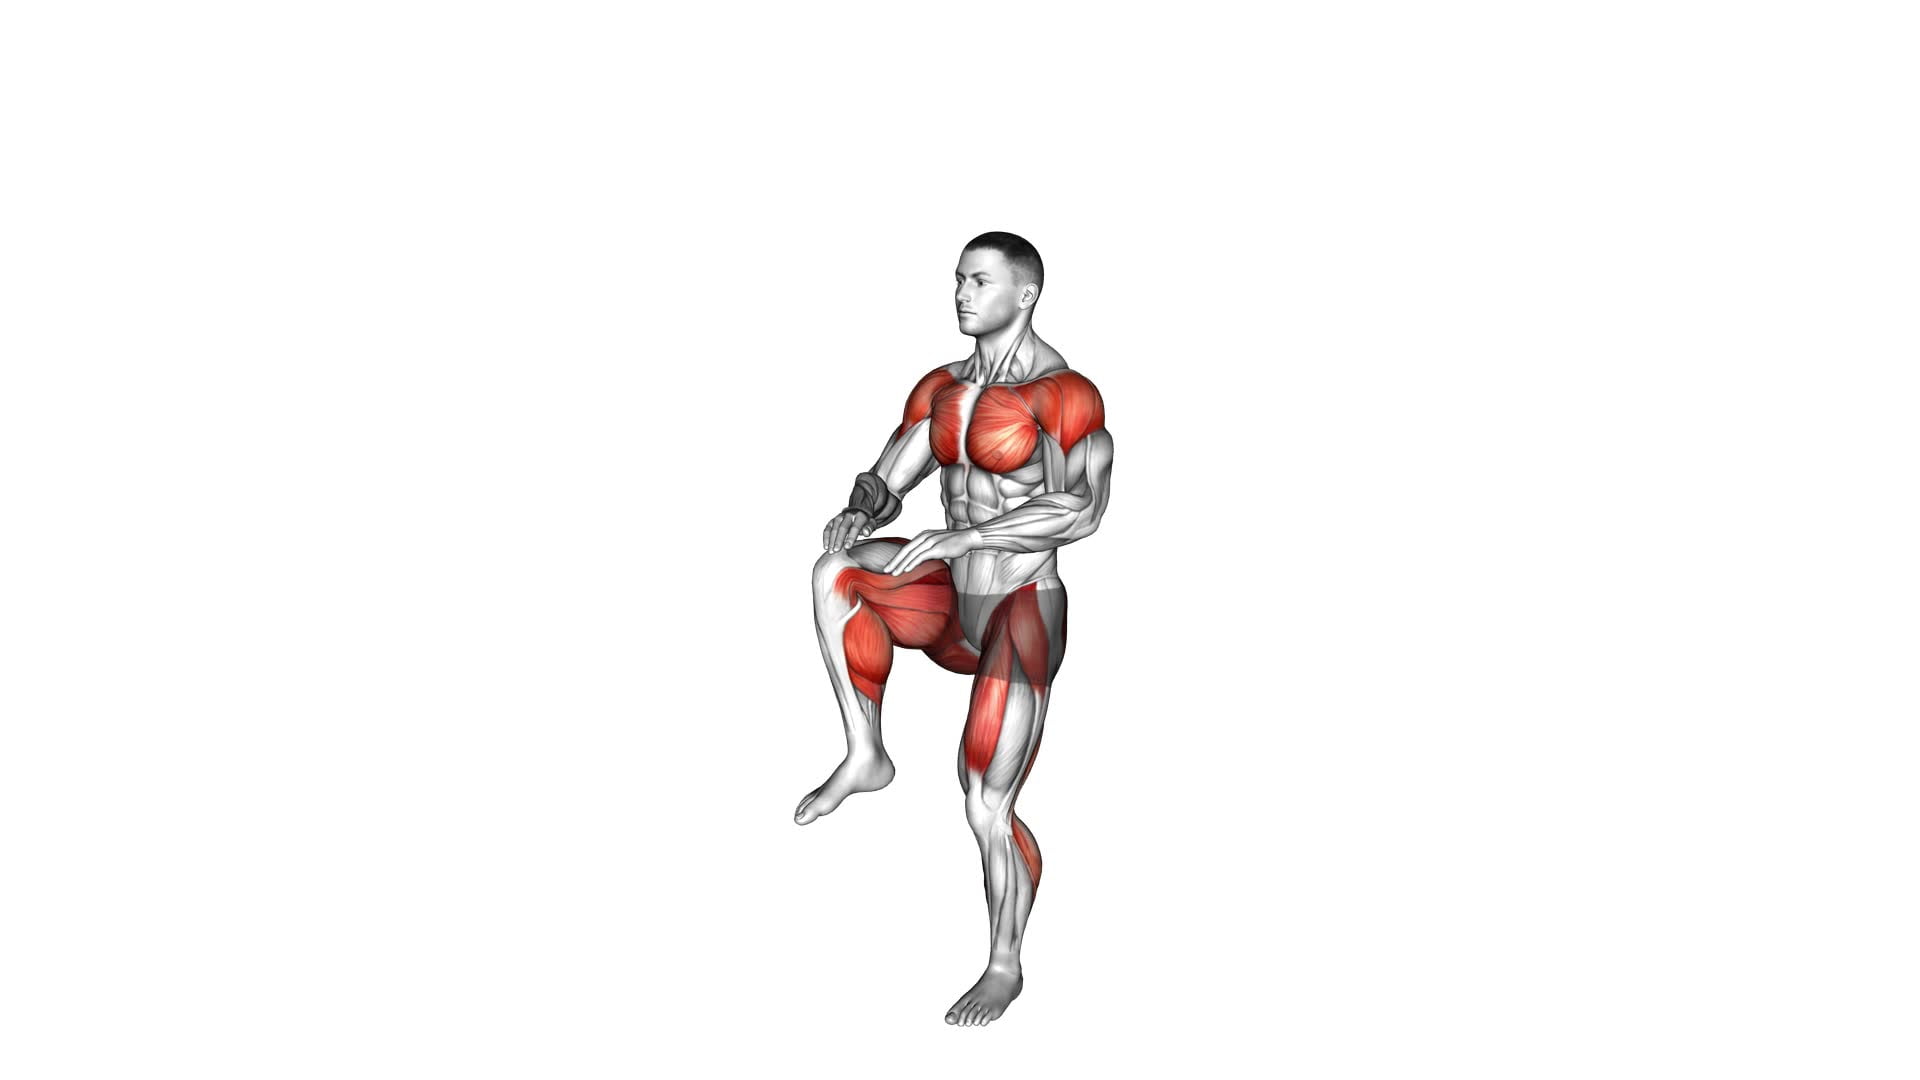 Jumping Jack High Knee (male) - Video Exercise Guide & Tips